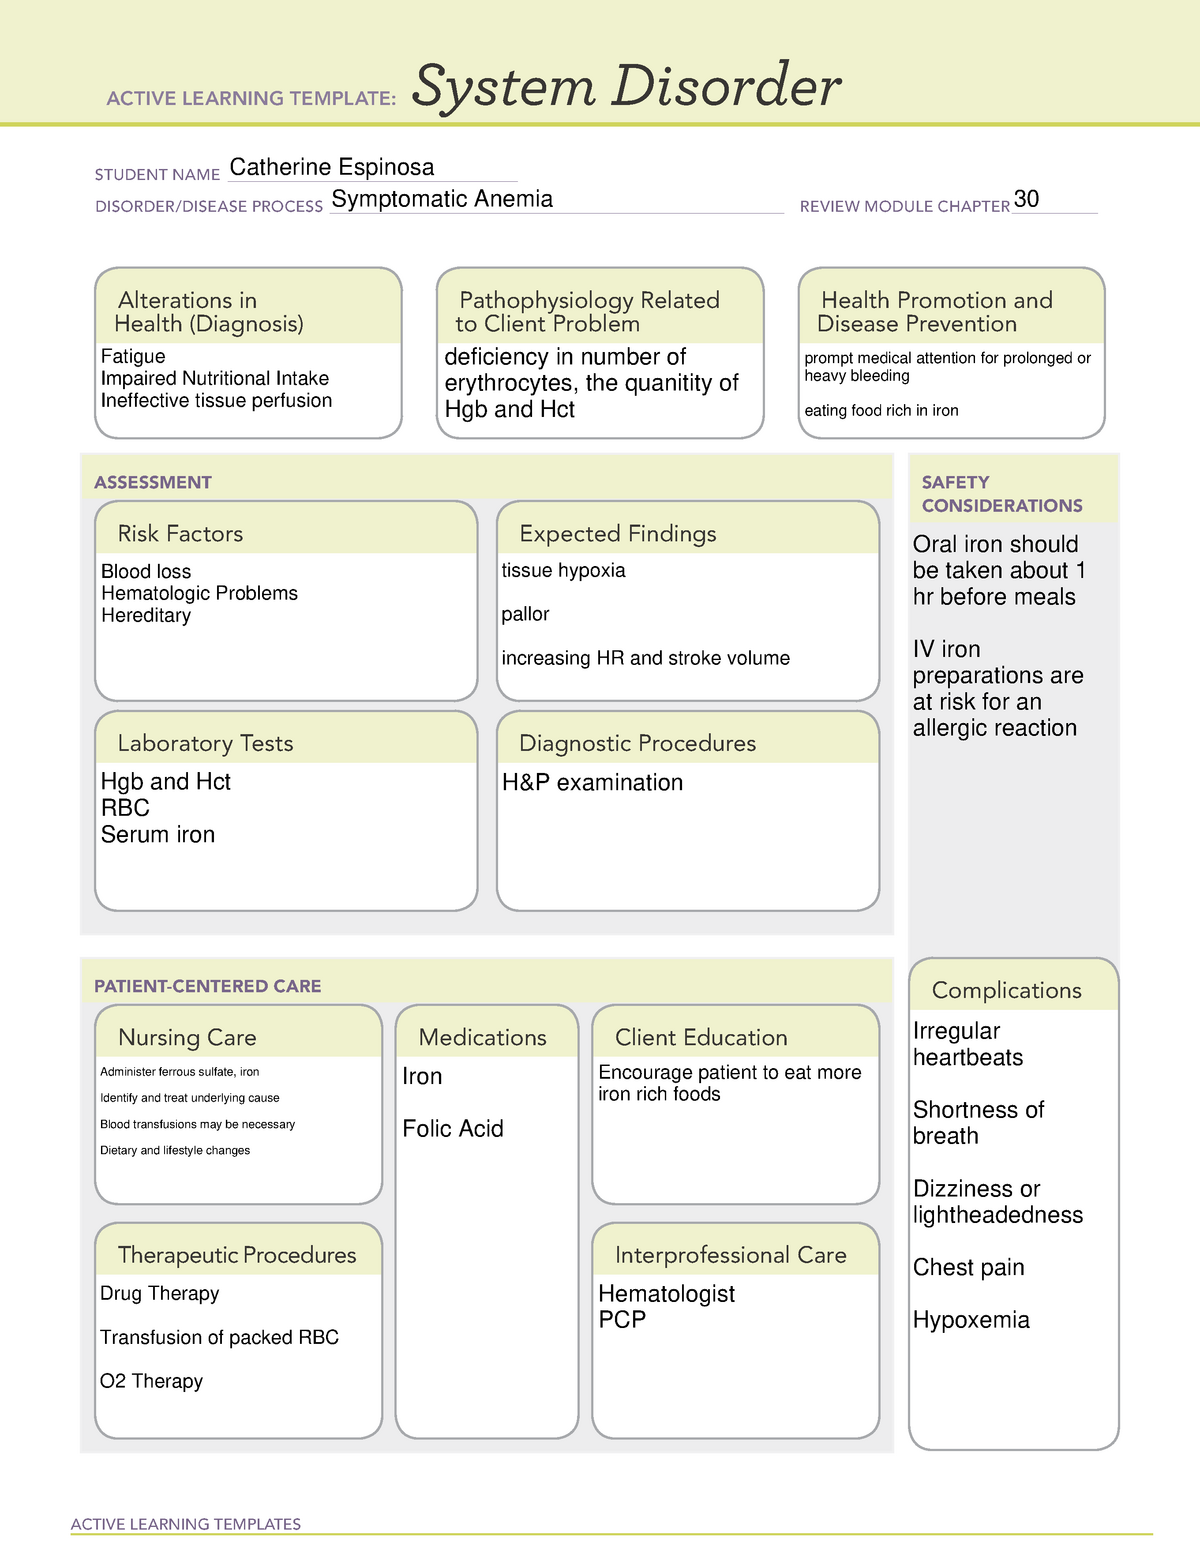 Symptomatic Anemia System Disorder ACTIVE LEARNING TEMPLATES System